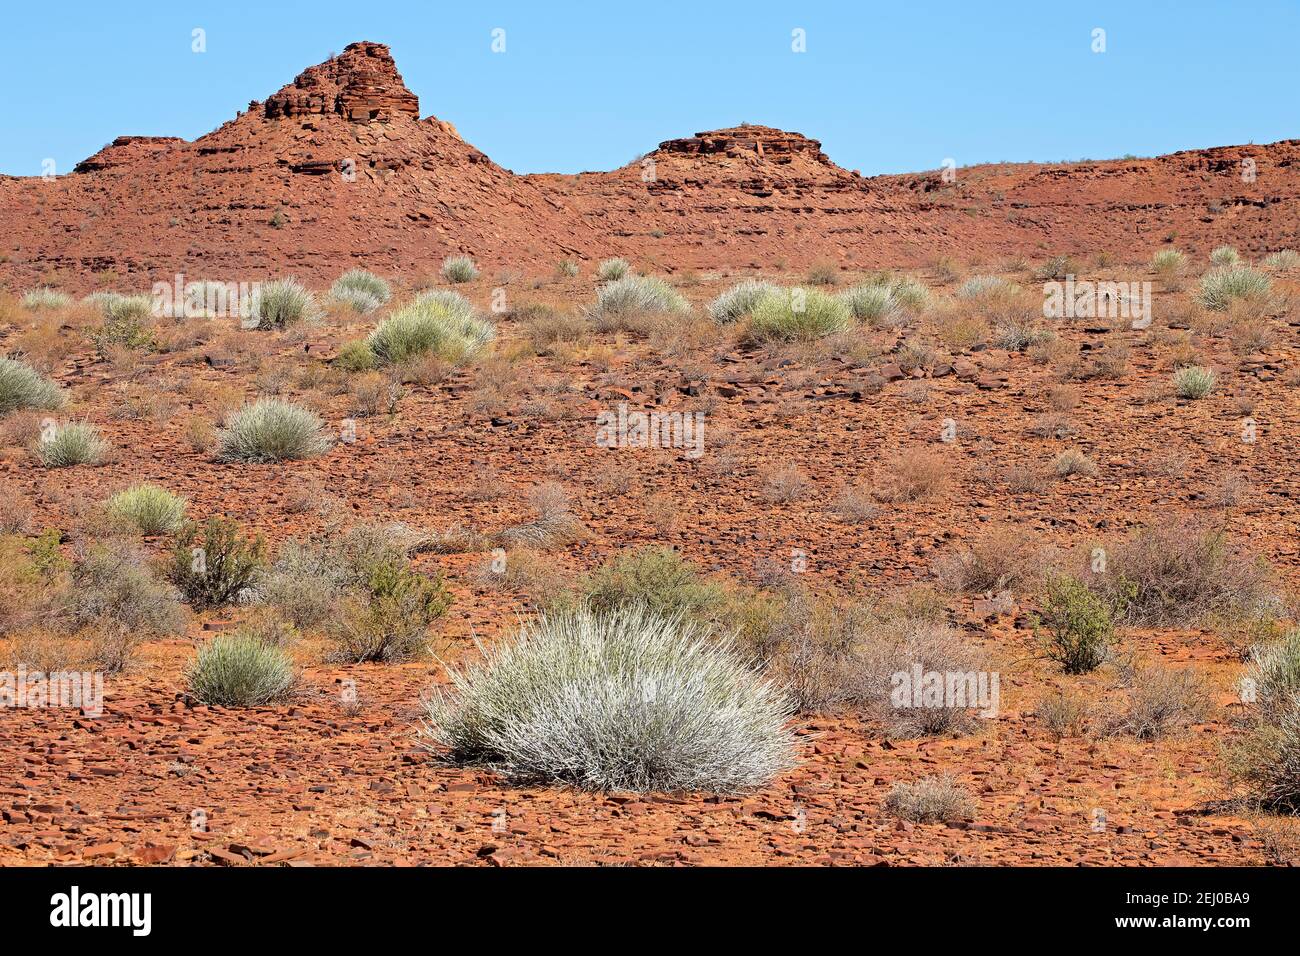 Rugged desert landscape with rocks and desert plants - southern Namibia Stock Photo